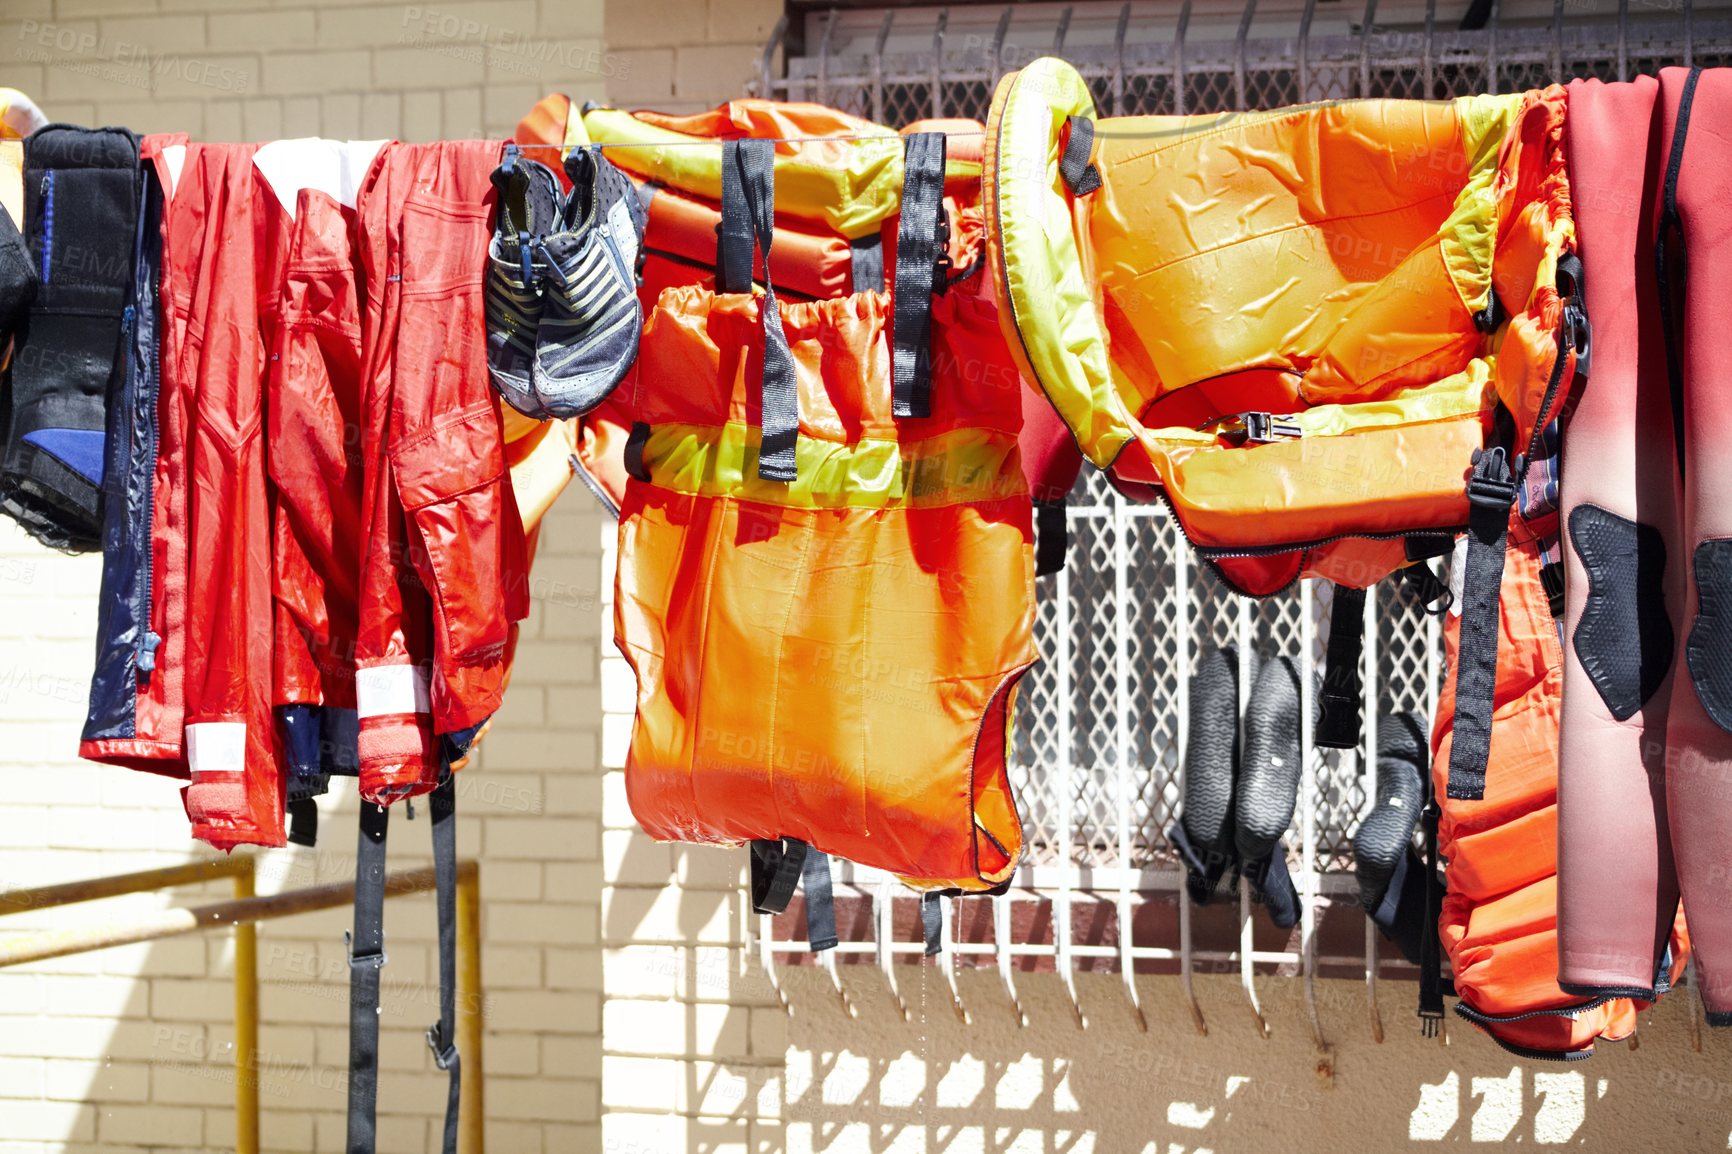 Buy stock photo Cropped shot of lifeguard gear hanging on a washing line outside